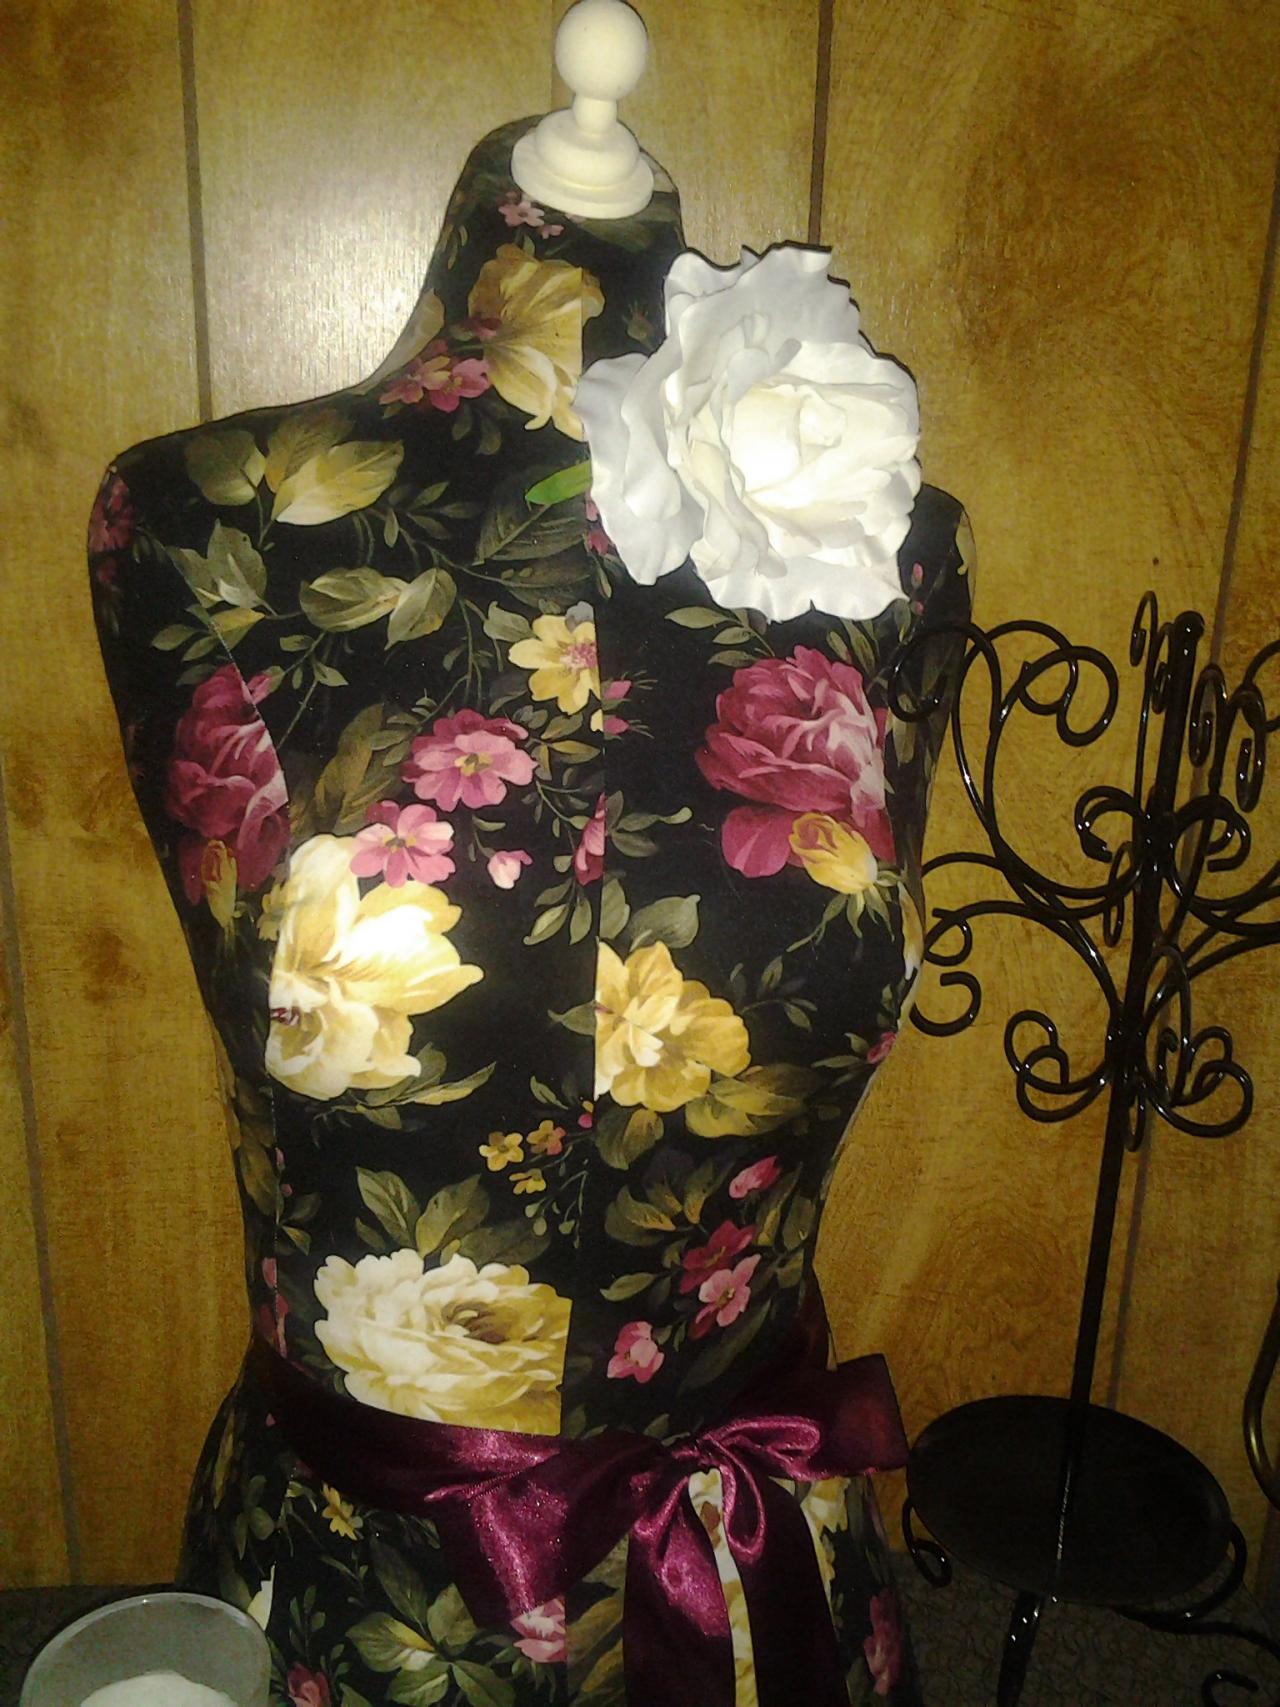 Boutique Dress Form Designs With Stand, Life Size Torso Great For Store Front Display Or Home Decor. Decorative Floral Inspired By Pottery Barn.